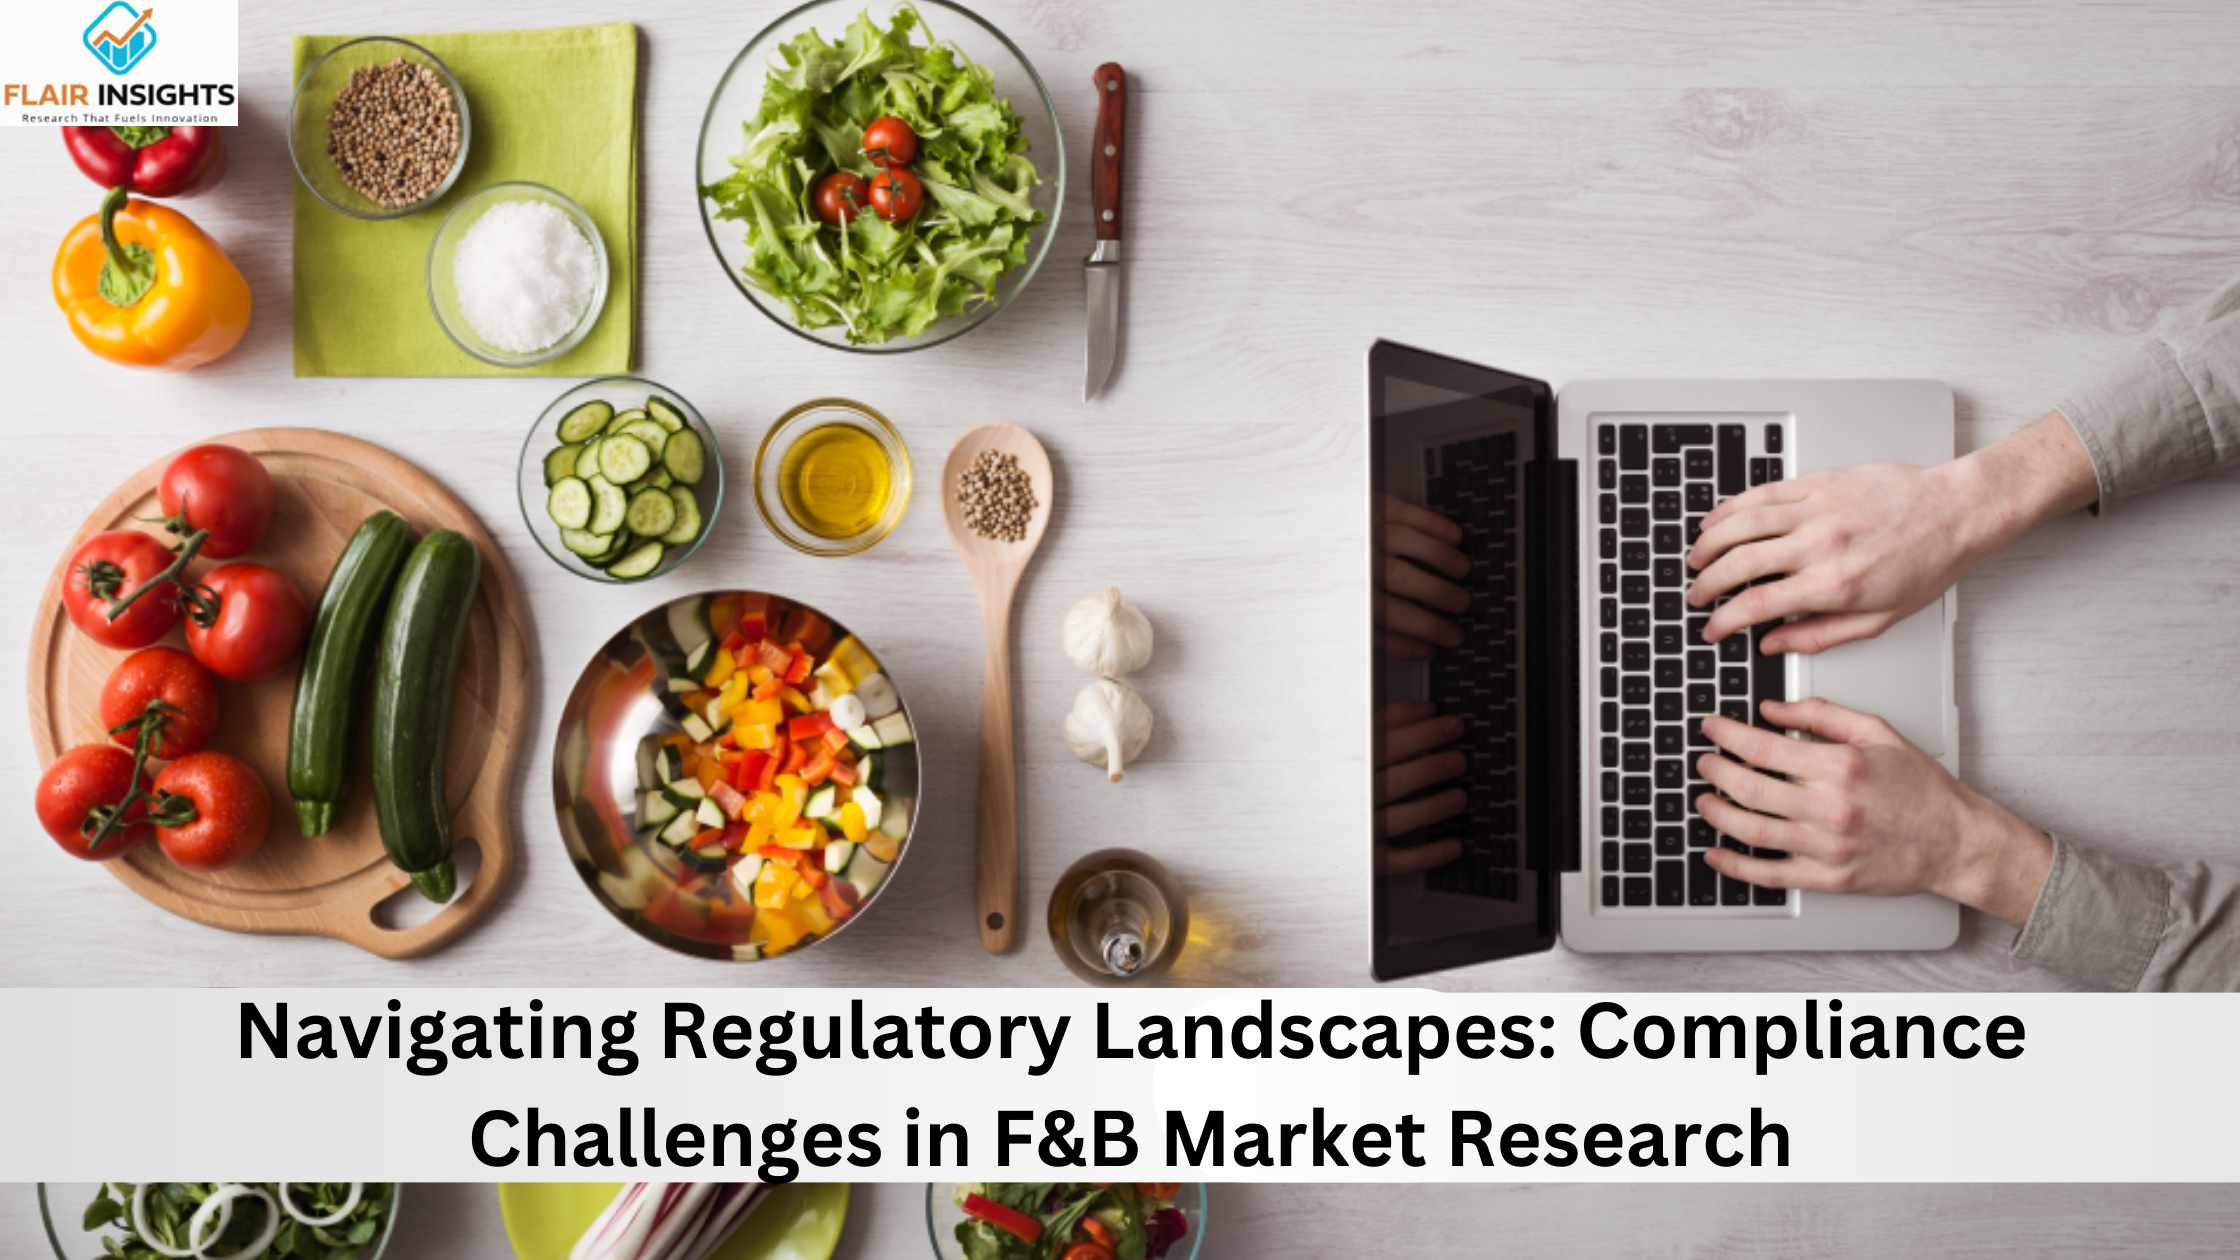 compliance-challenges-in-f&b-market-research